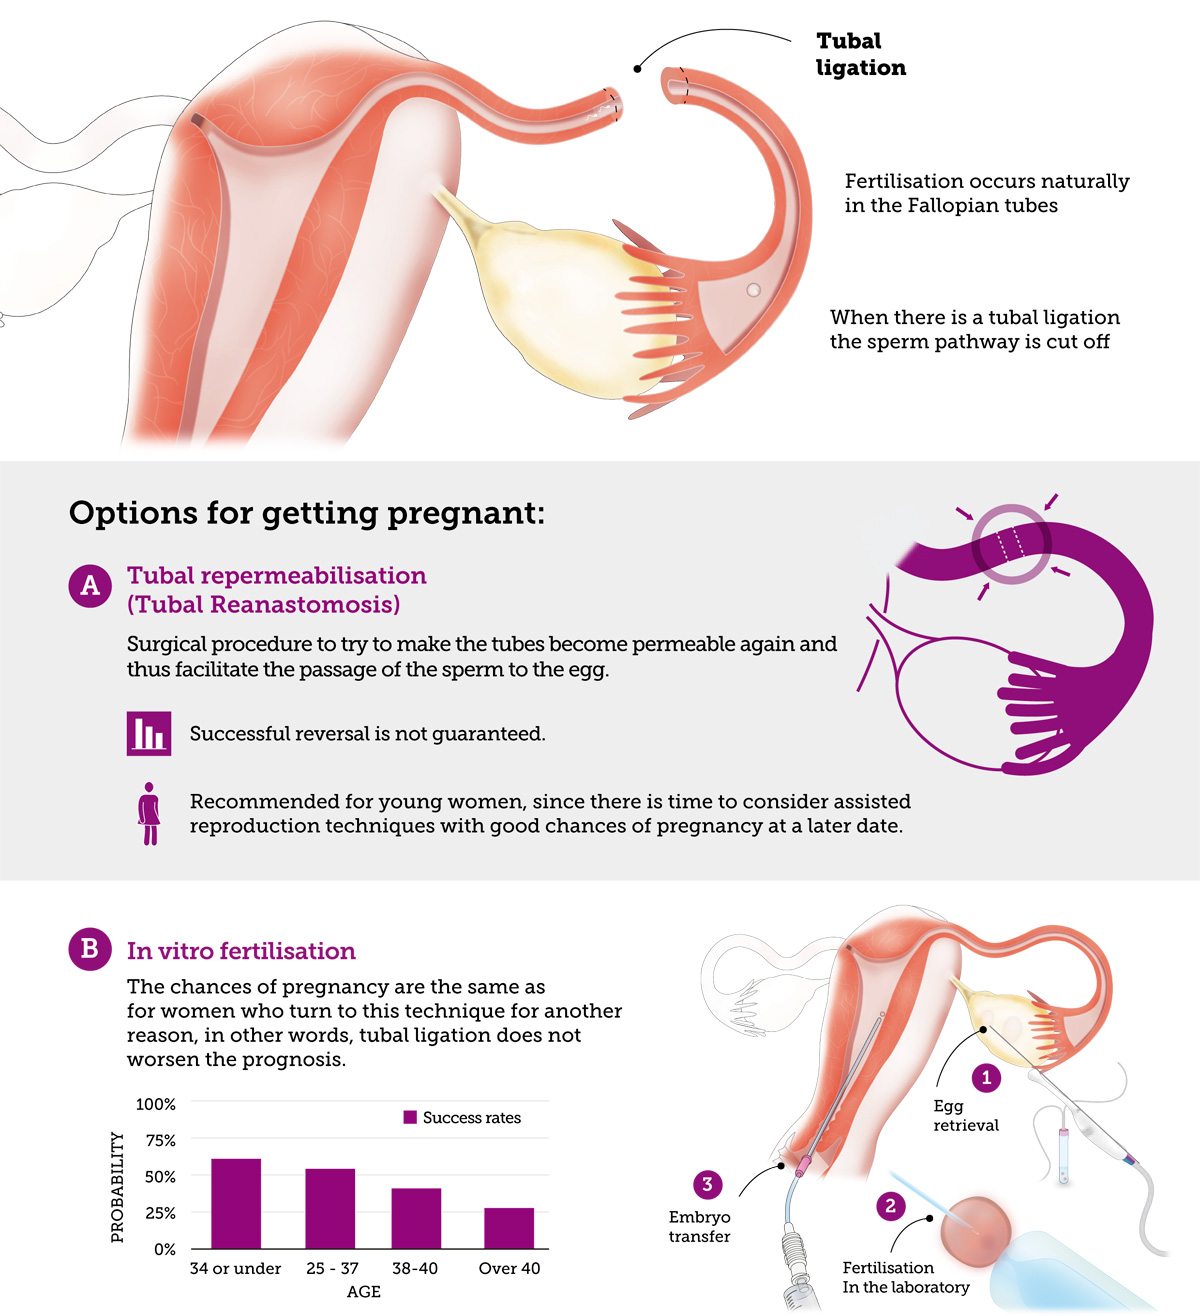 infographic about the chances of getting pregnant during folopian tube sterilization